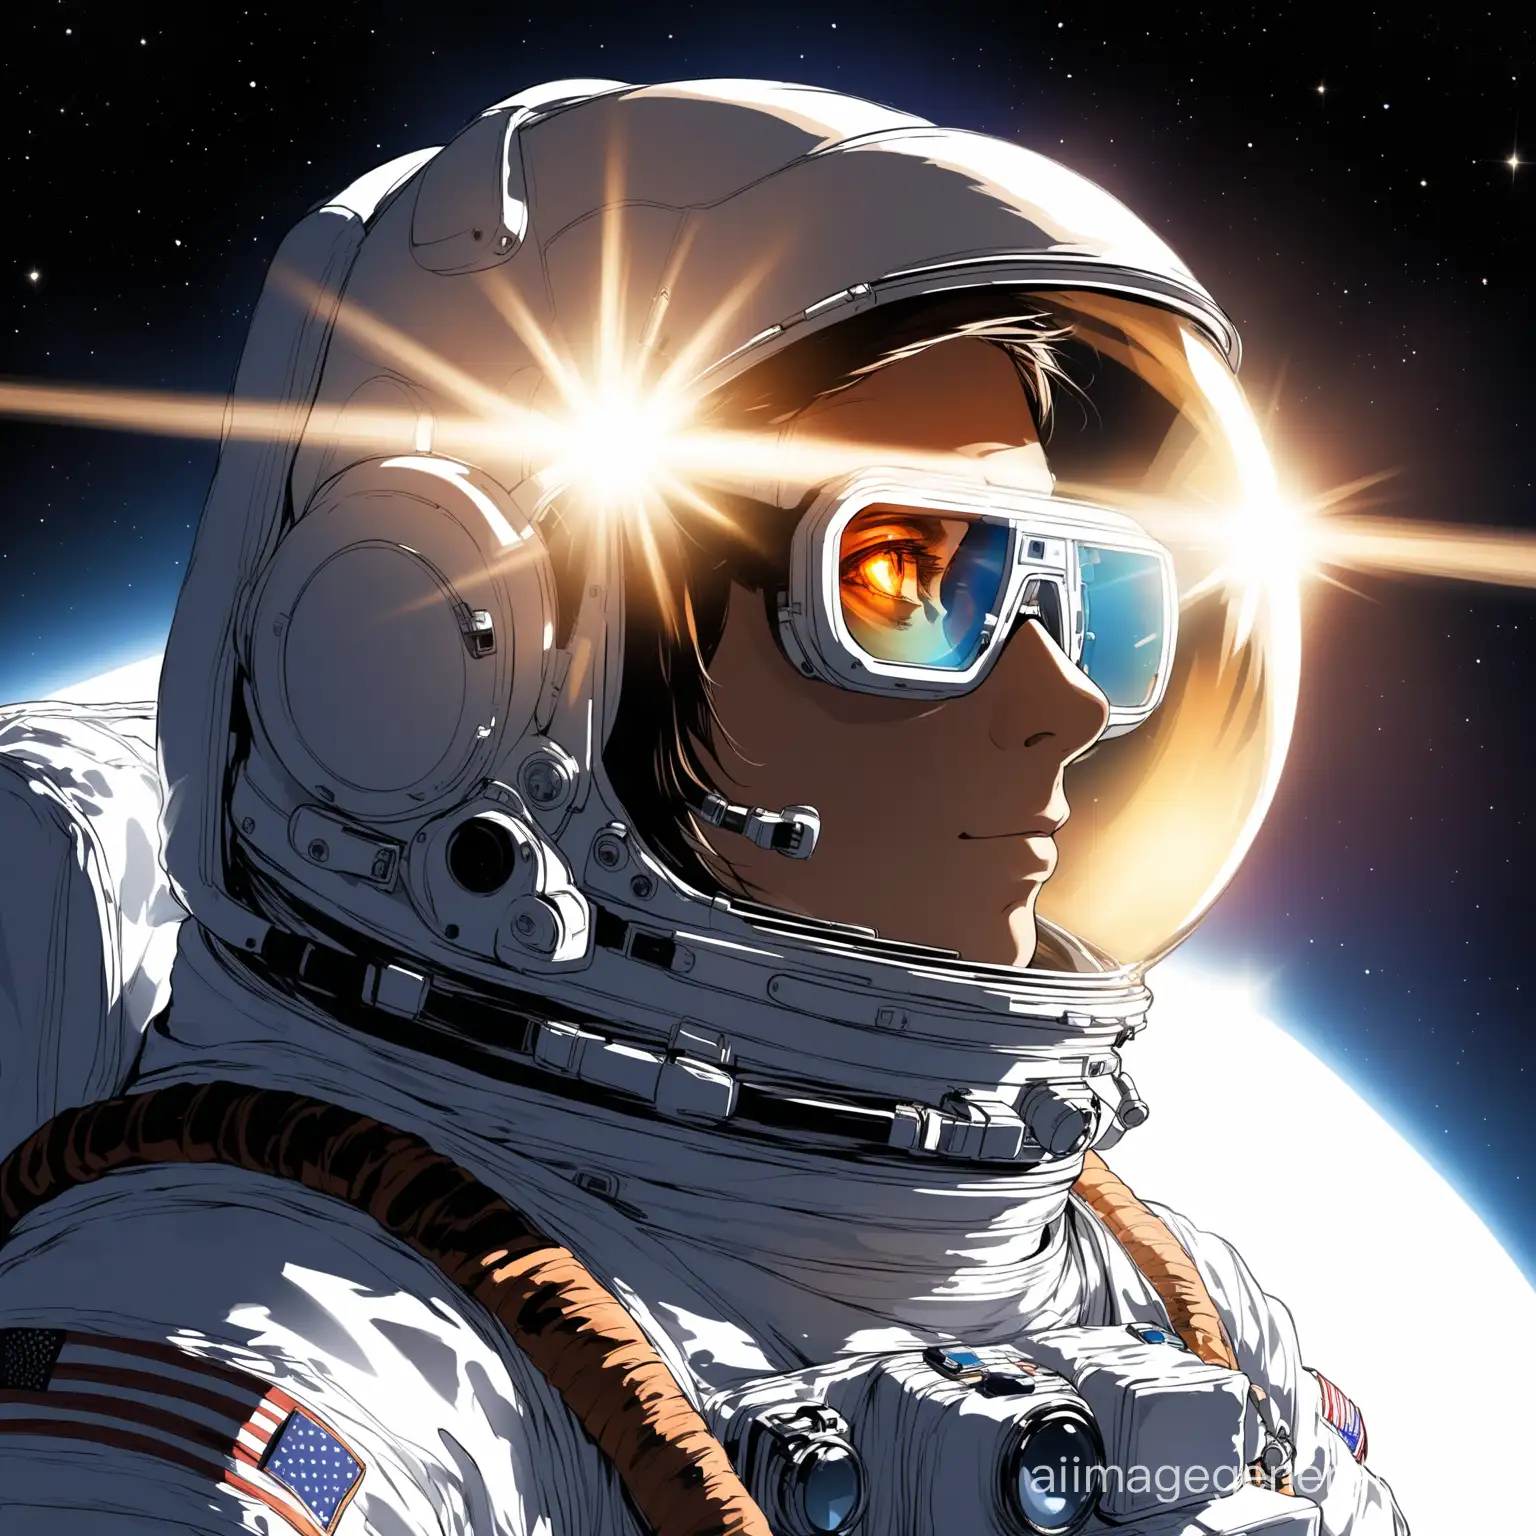 Profile shot, astronaut wearing X-ray glasses, long beams of light bursting from his eyes